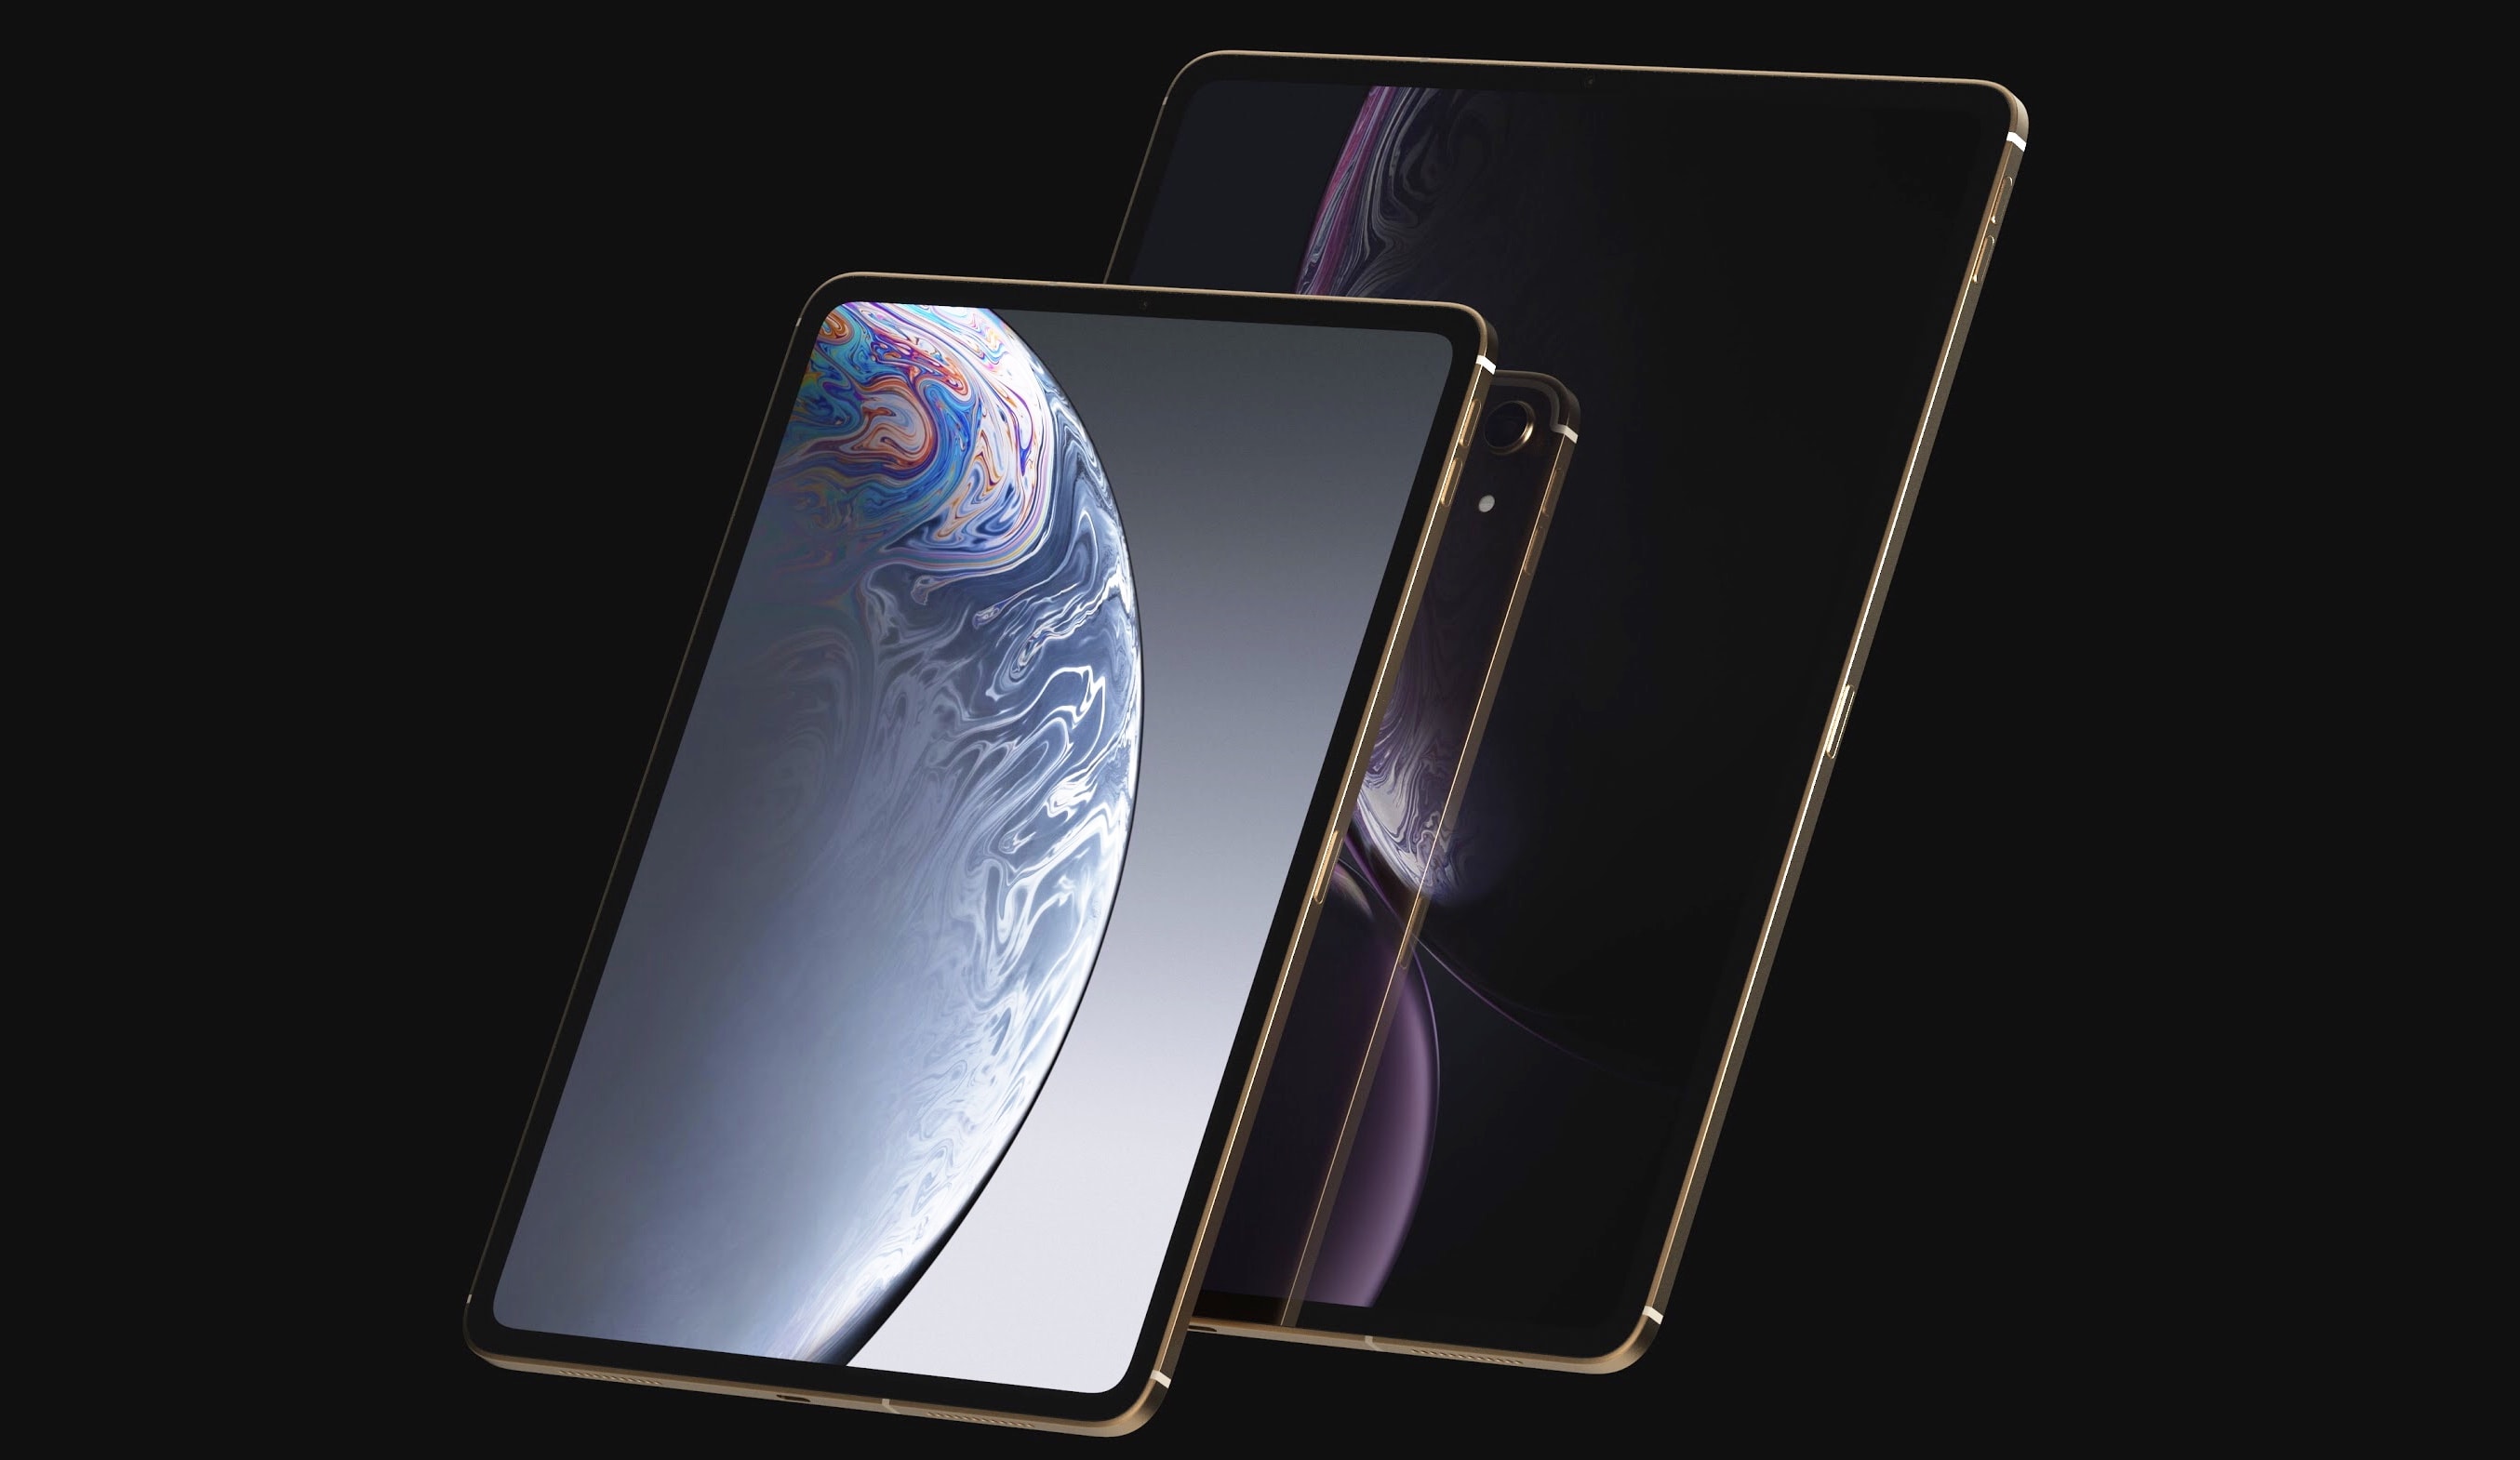 The 2018 iPad Pro has supposedly been redesigned without without the Home button. And without a Lightning port too.